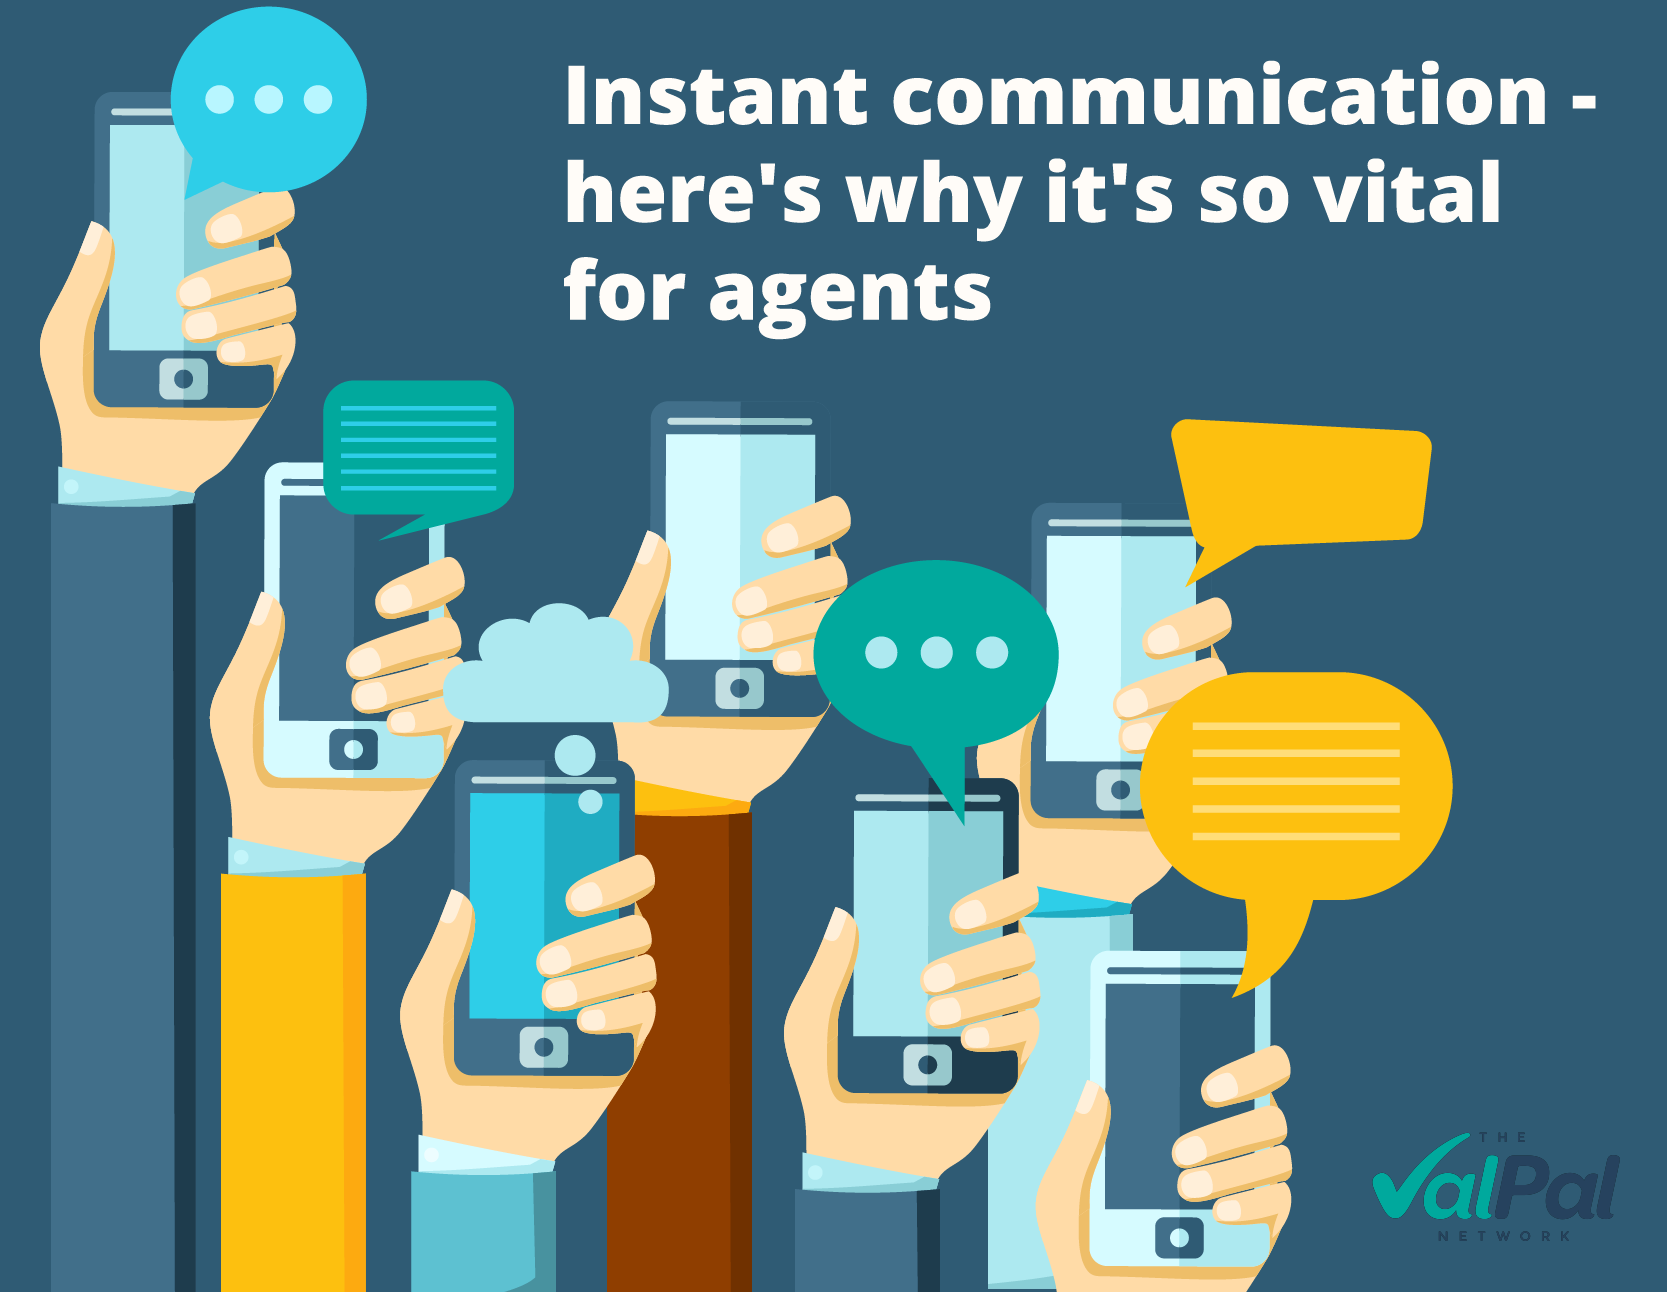 Instant communication - here's why it's so vital for agents